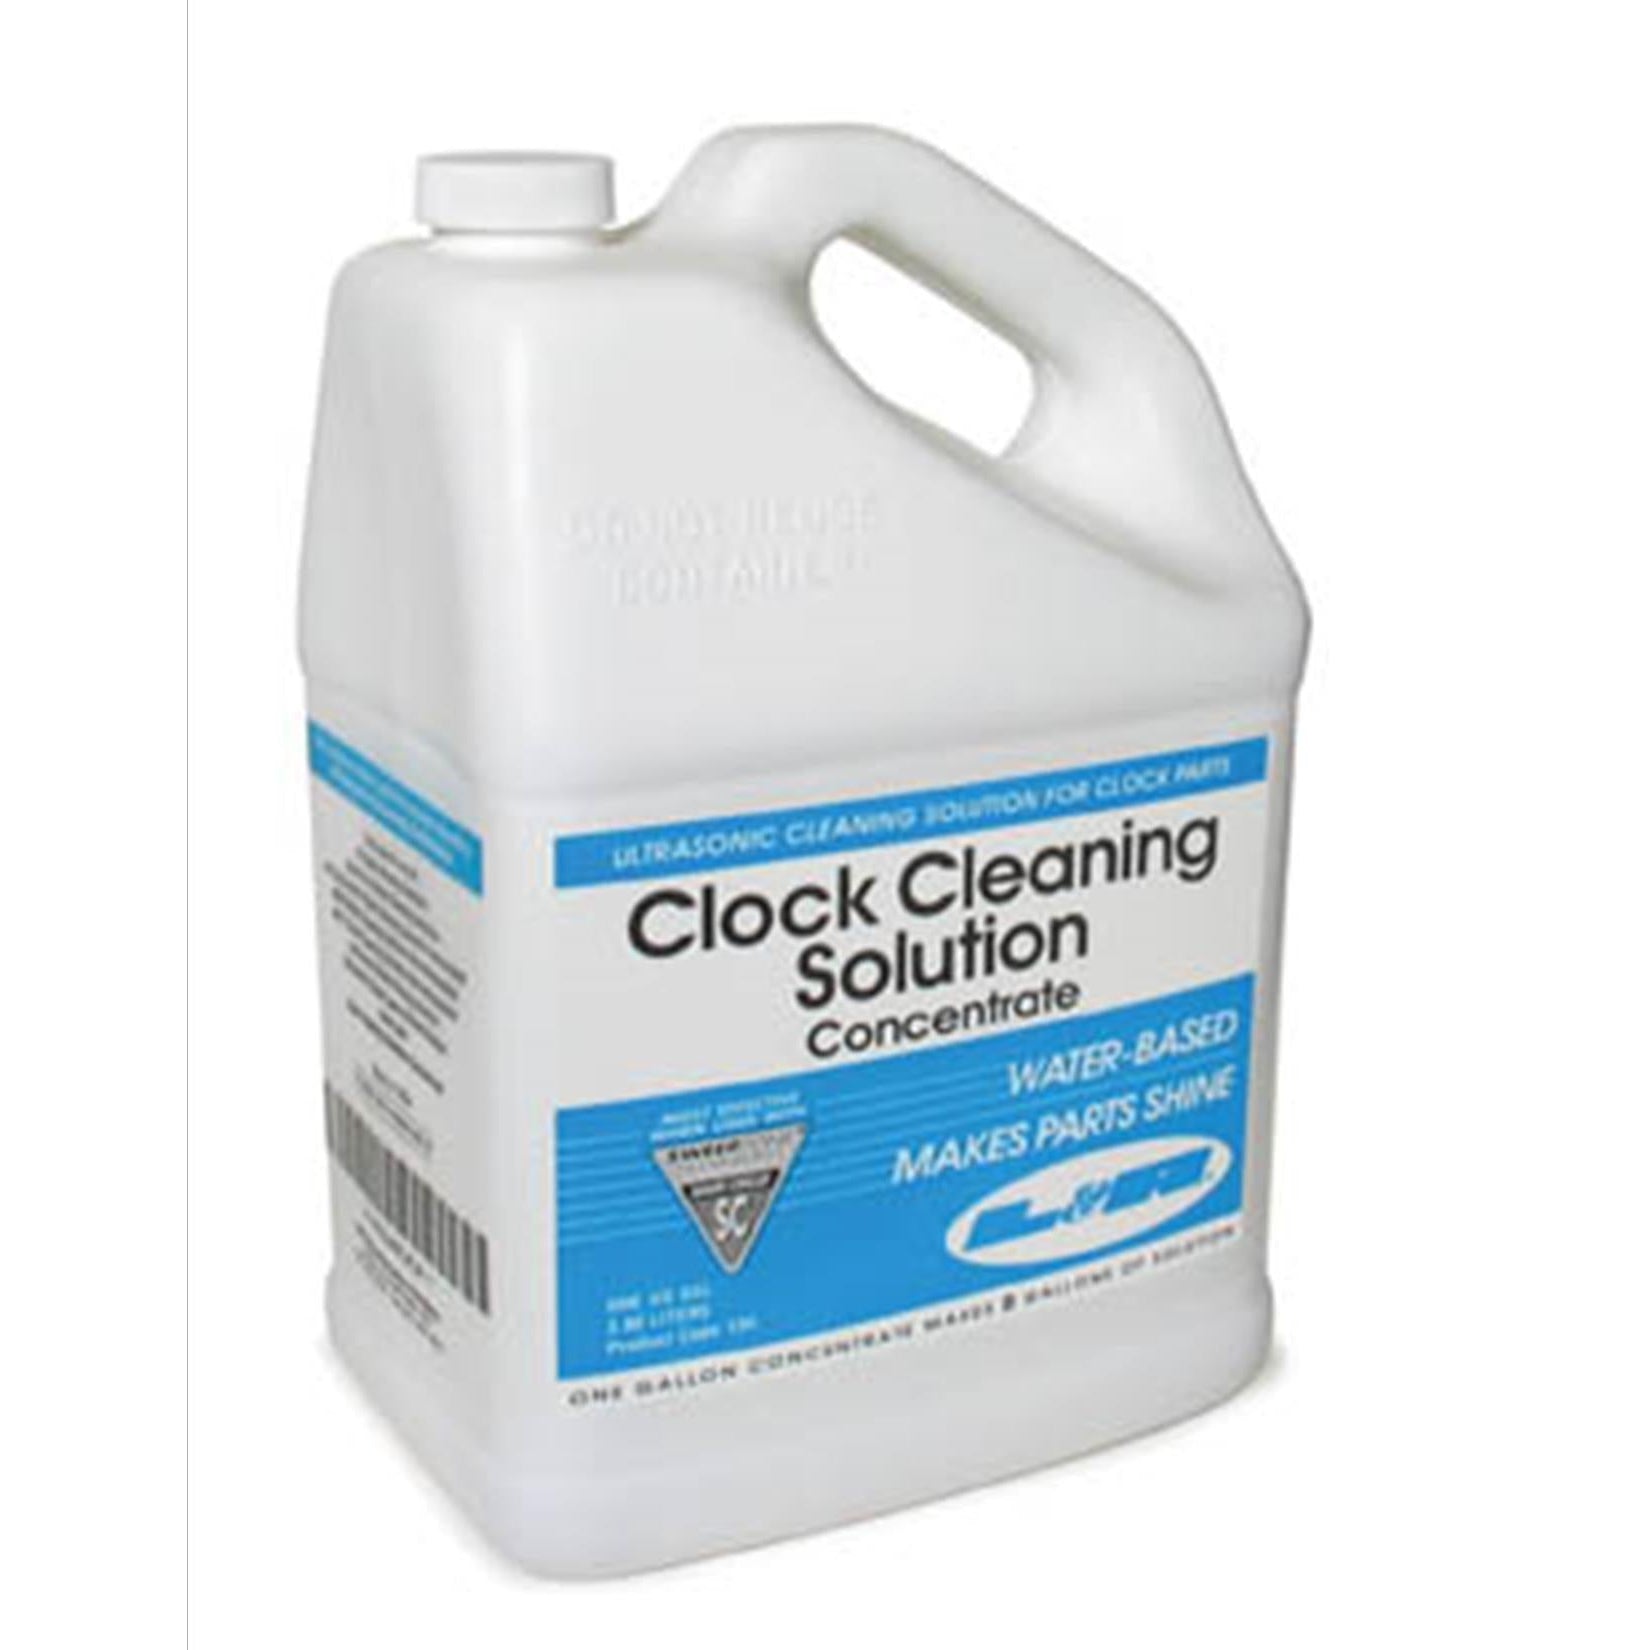 L&R #134 CLOCK CLEANING CONCENTRATE